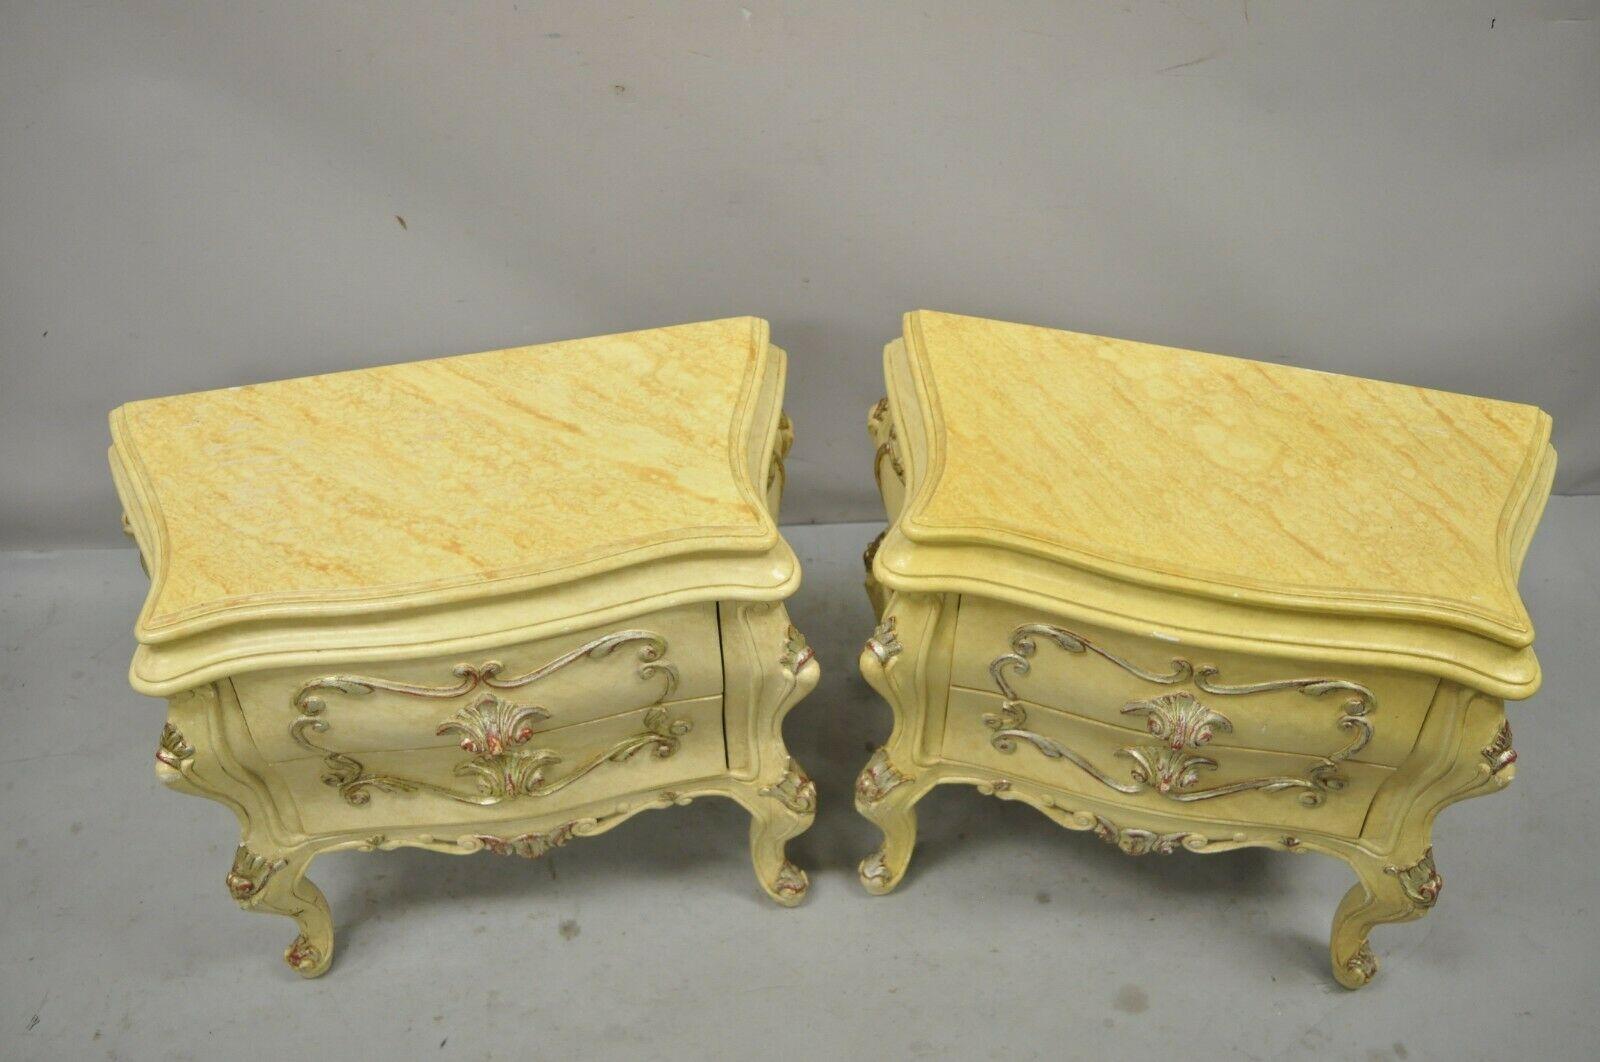 20th Century Italian Rococo Cream Lacquer 2 Drawer Nightstands Bombe Bedside Commode, a Pair For Sale